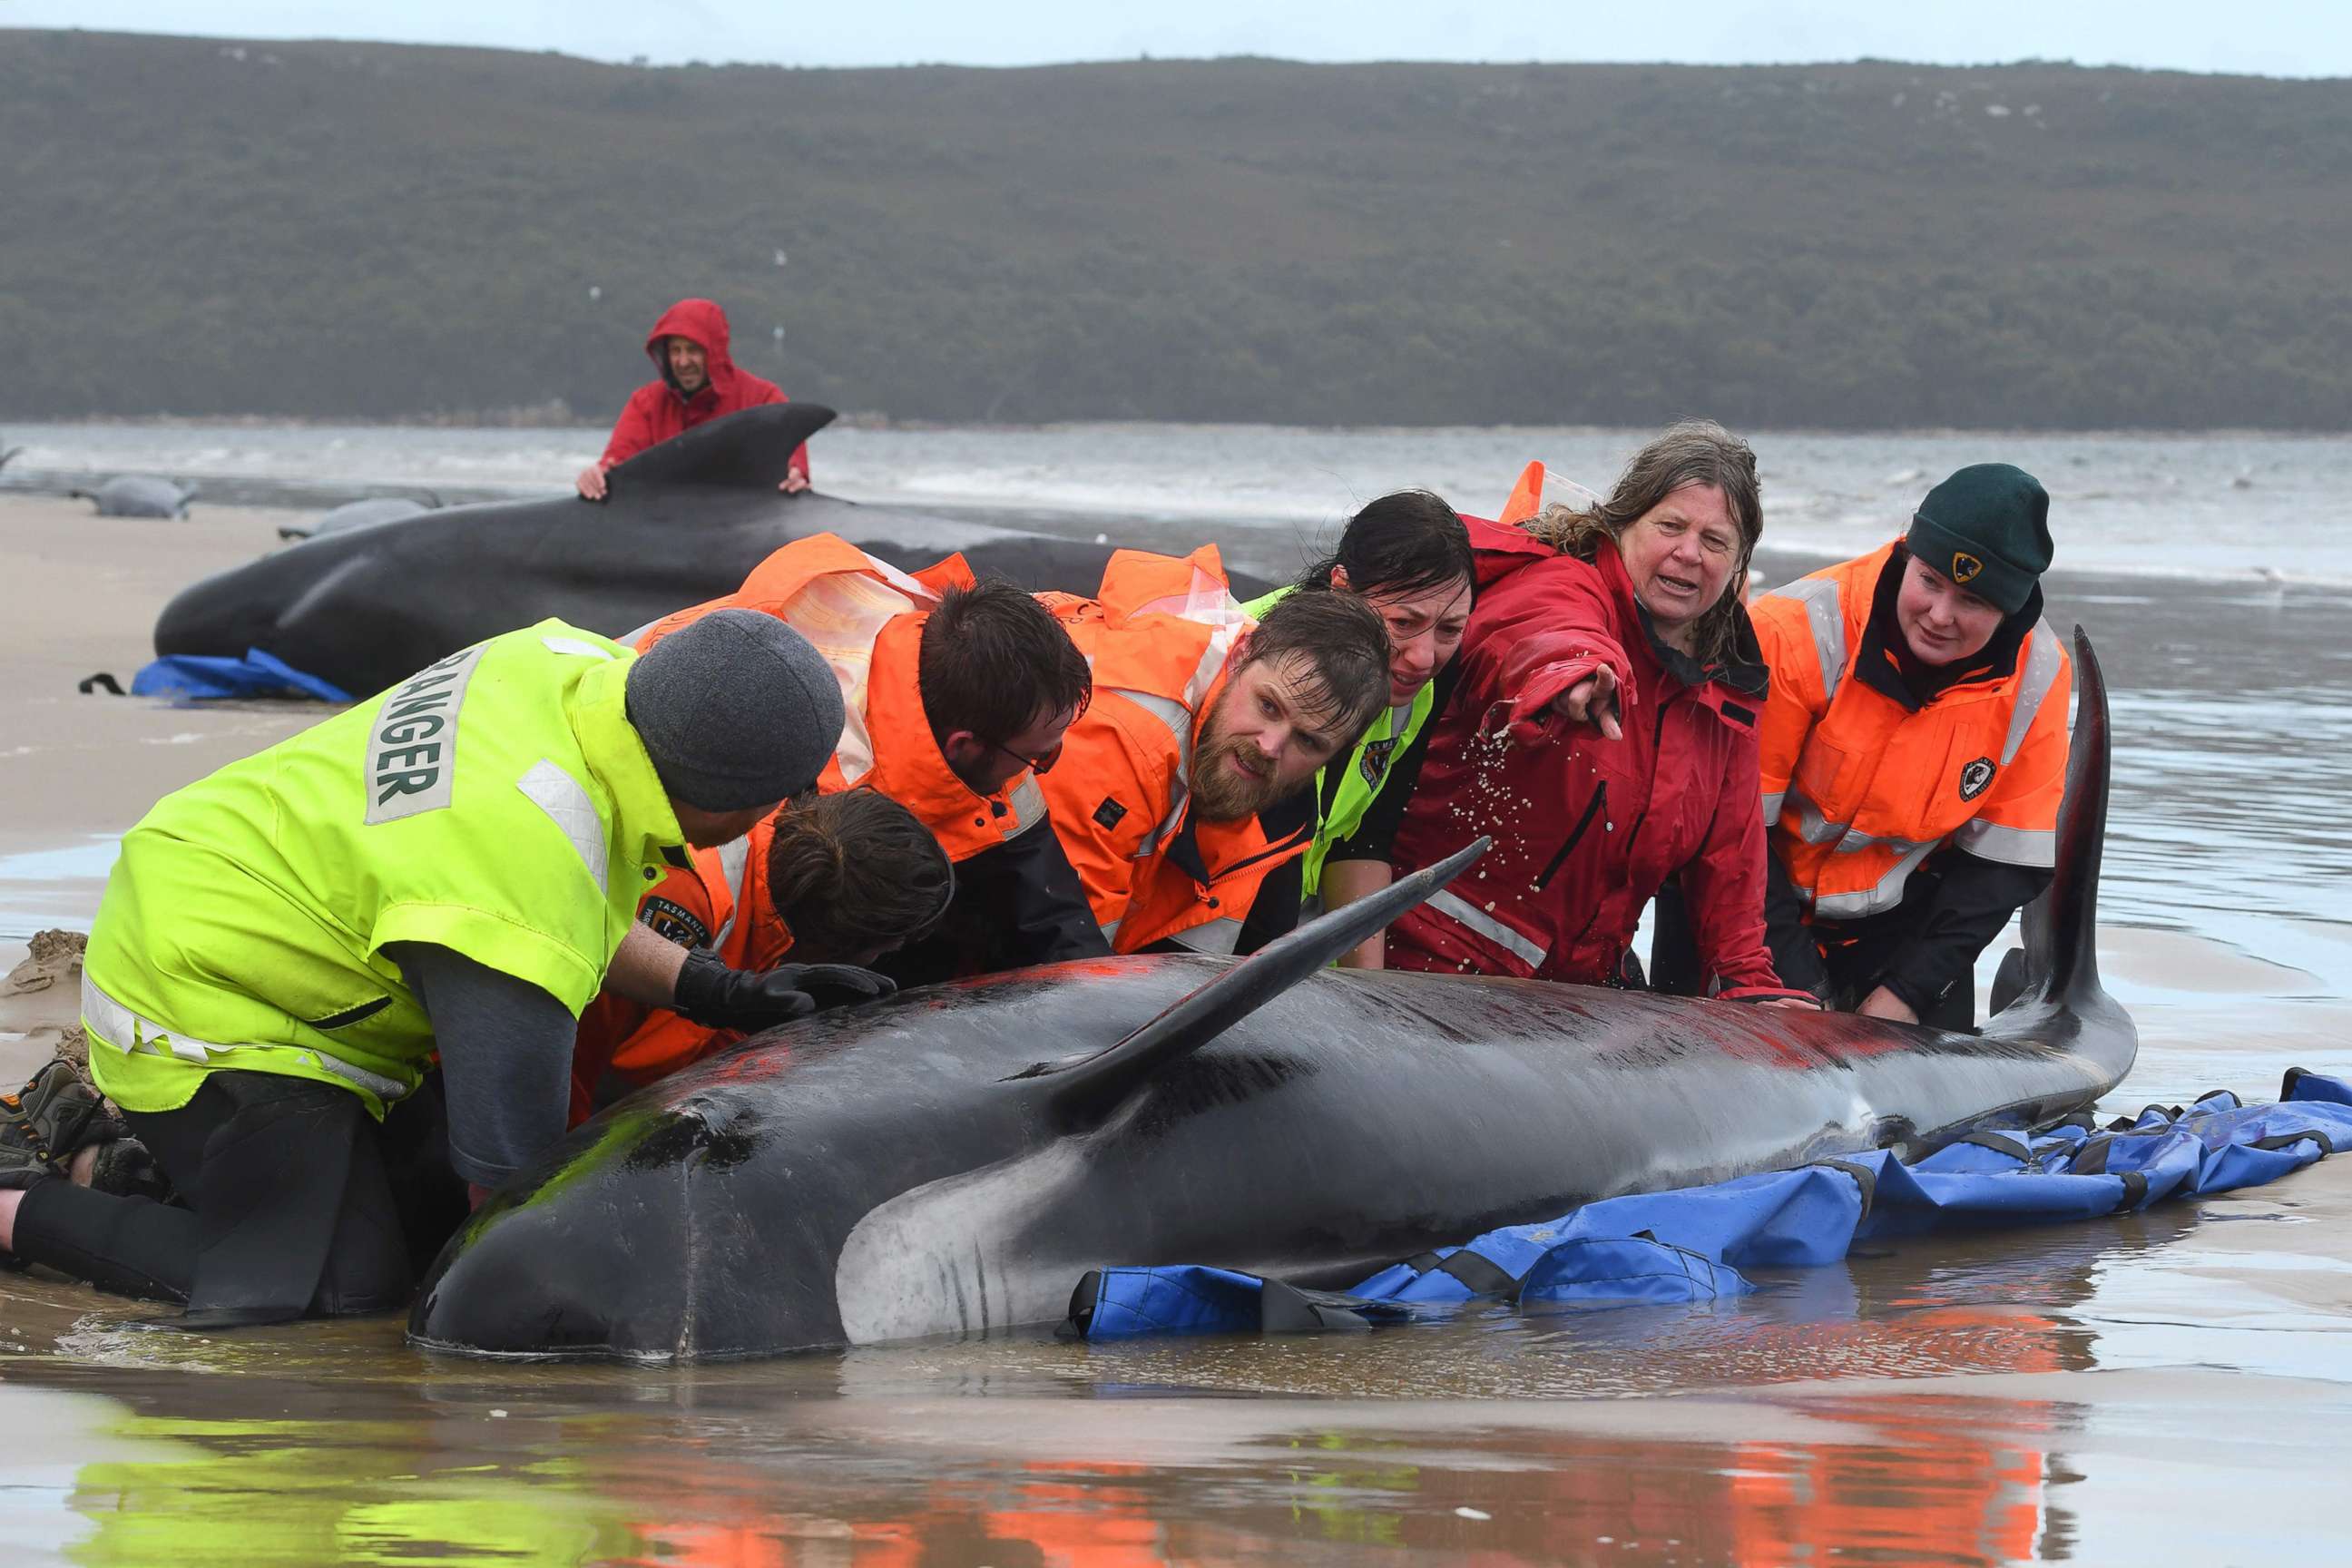 At Least 380 Whales Dead In Australia's Largest-Ever Mass Stranding : NPR